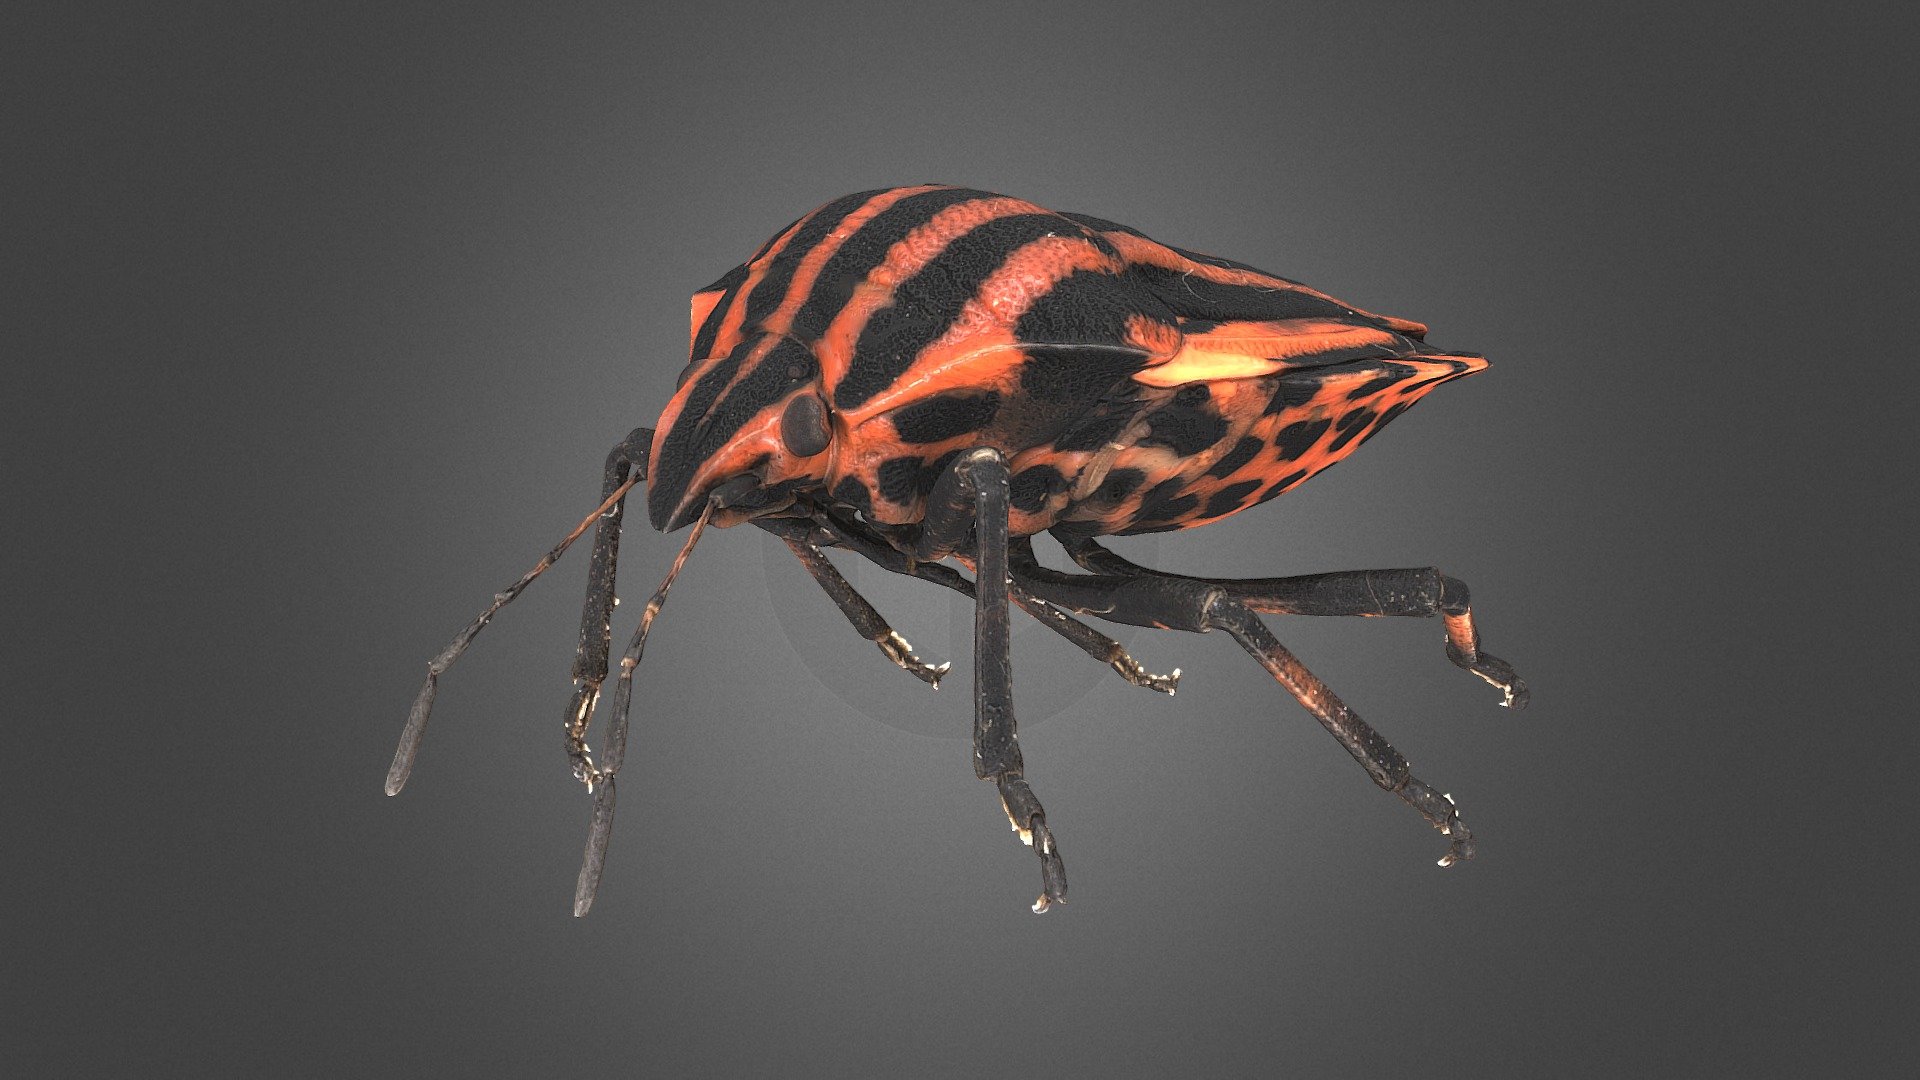 This is Graphosoma lineatum, the striped or minstrel bug. This beautiful insect is about 1 cm long and was scanned with some novel upgrades in our #disc3d
https://zookeys.pensoft.net/article/24584/ - Graphosoma lineatum - Download Free 3D model by Digital Archive of Natural History (DiNArDa) (@disc3d) 3d model